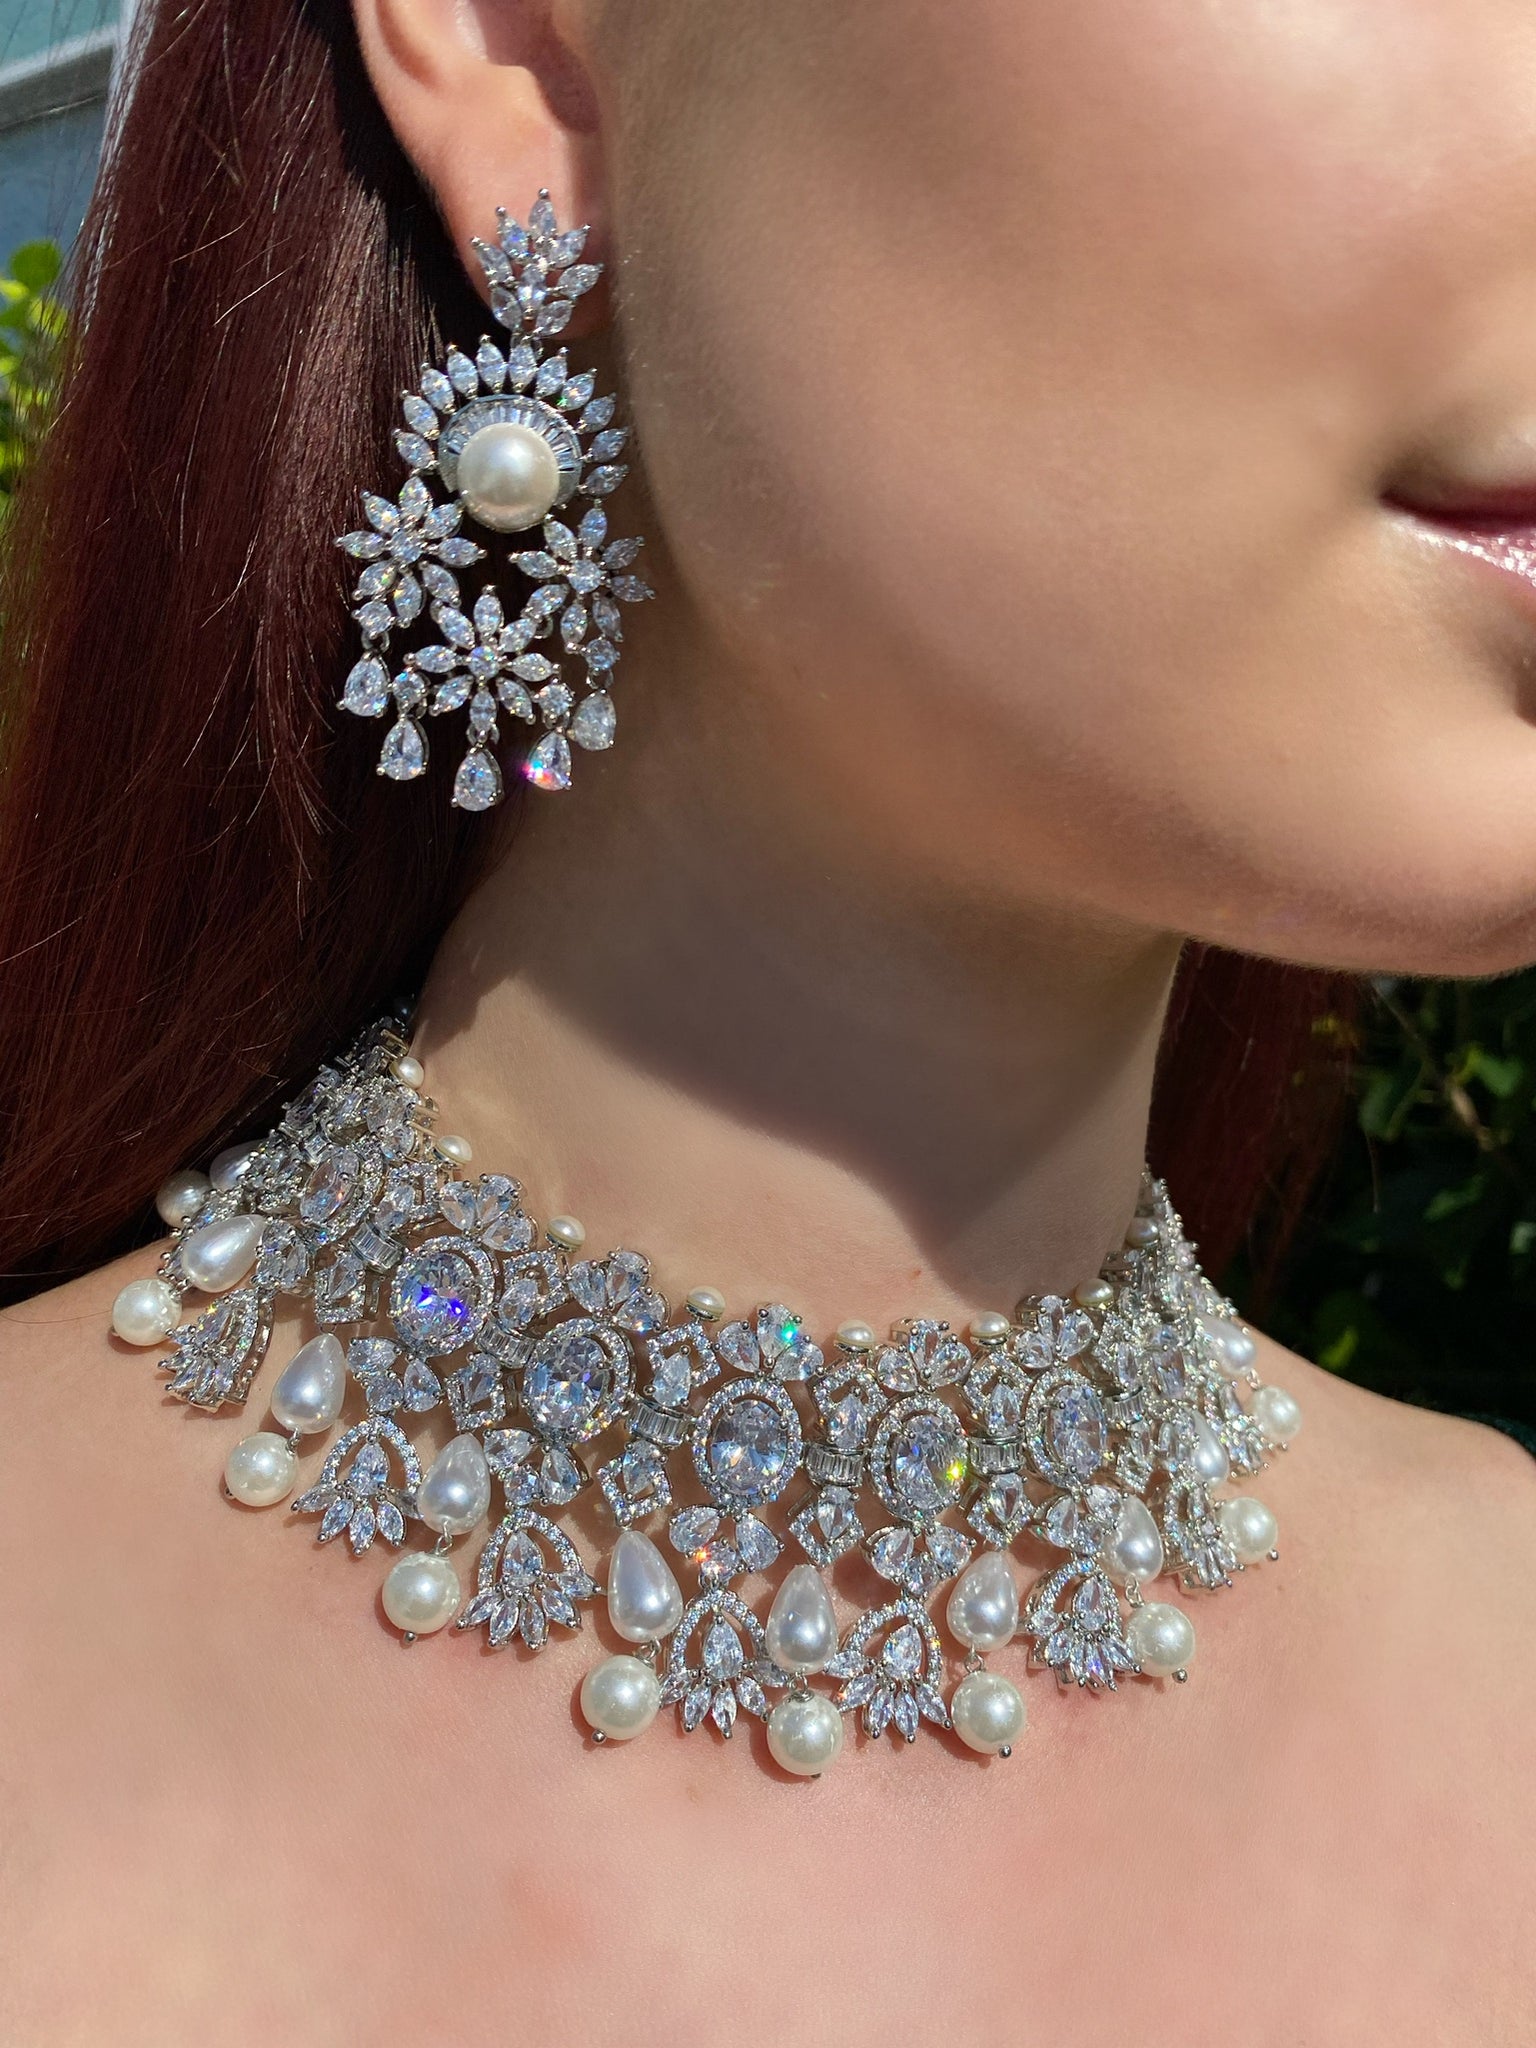 Pearly Ovals Diamondesque Choker Necklace and Earrings